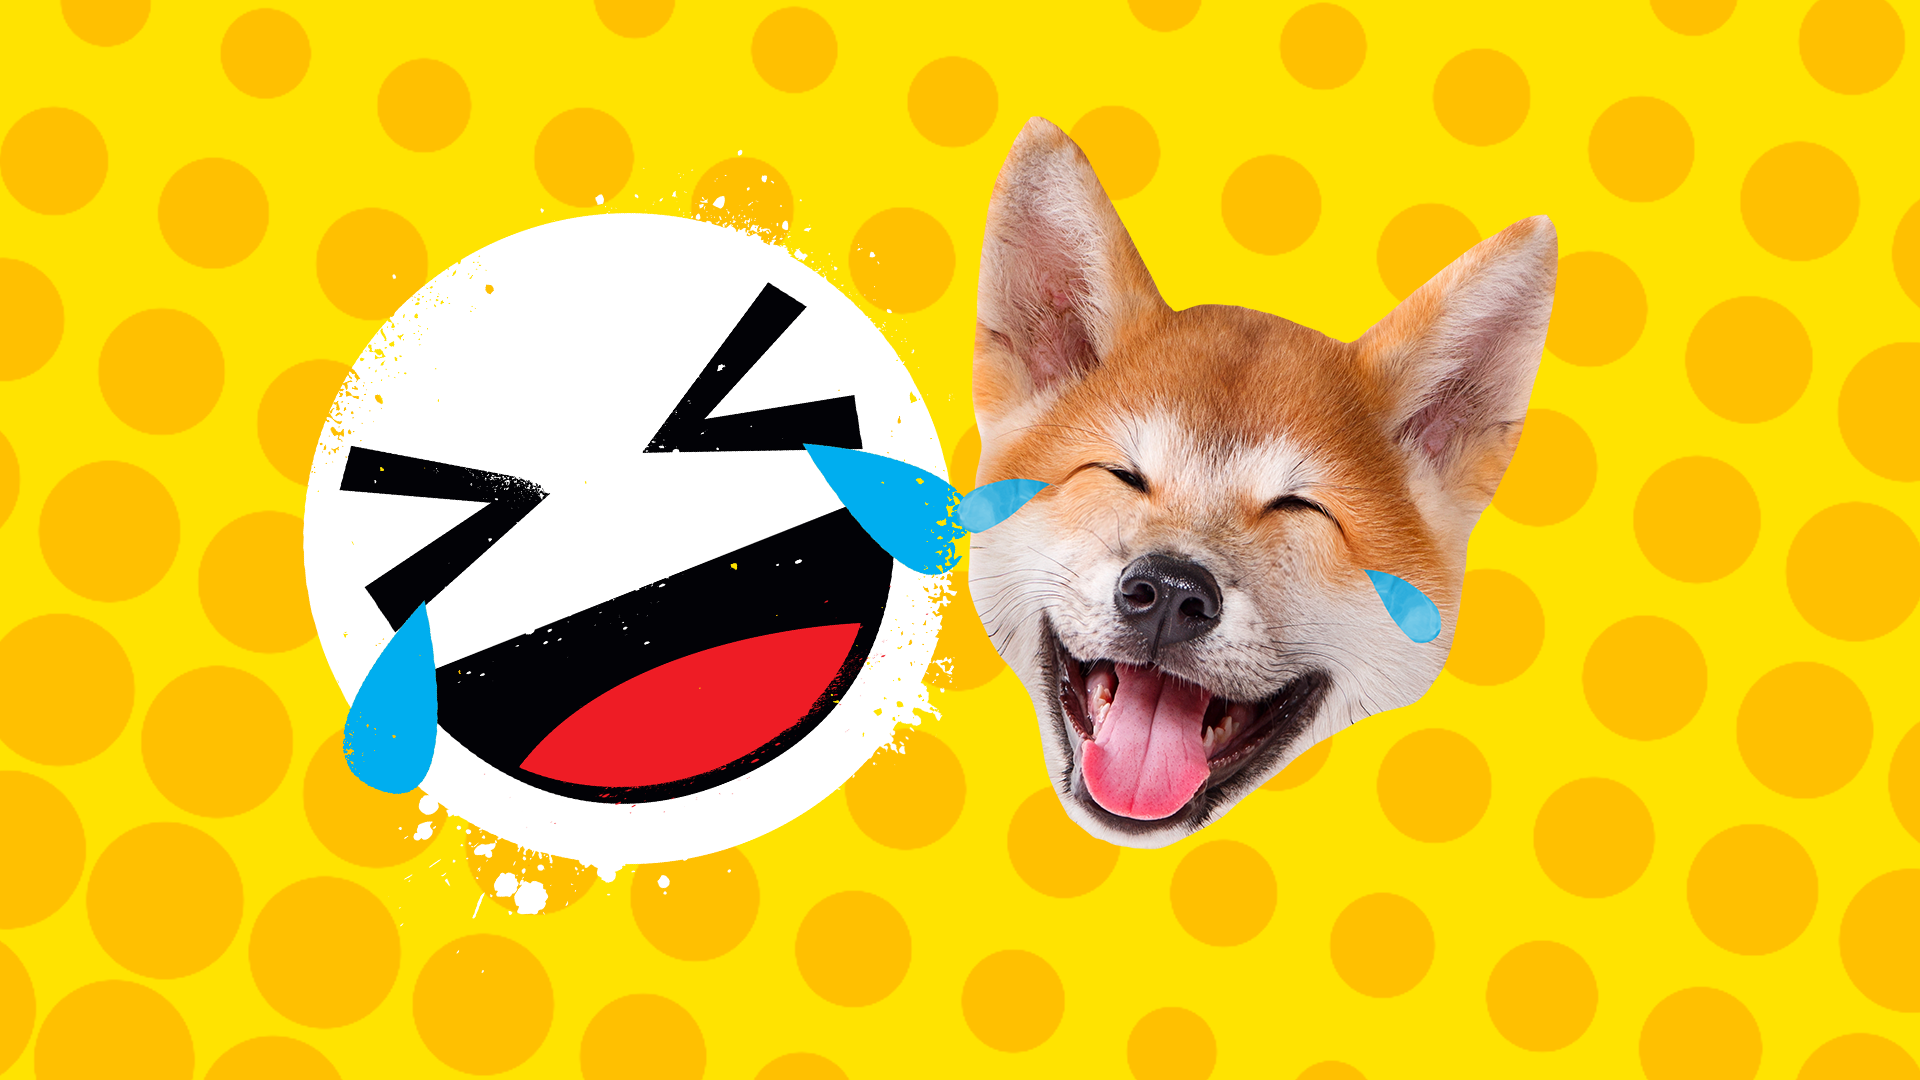 A laughing fox and laughing emoji face in front of a yellow spotted background